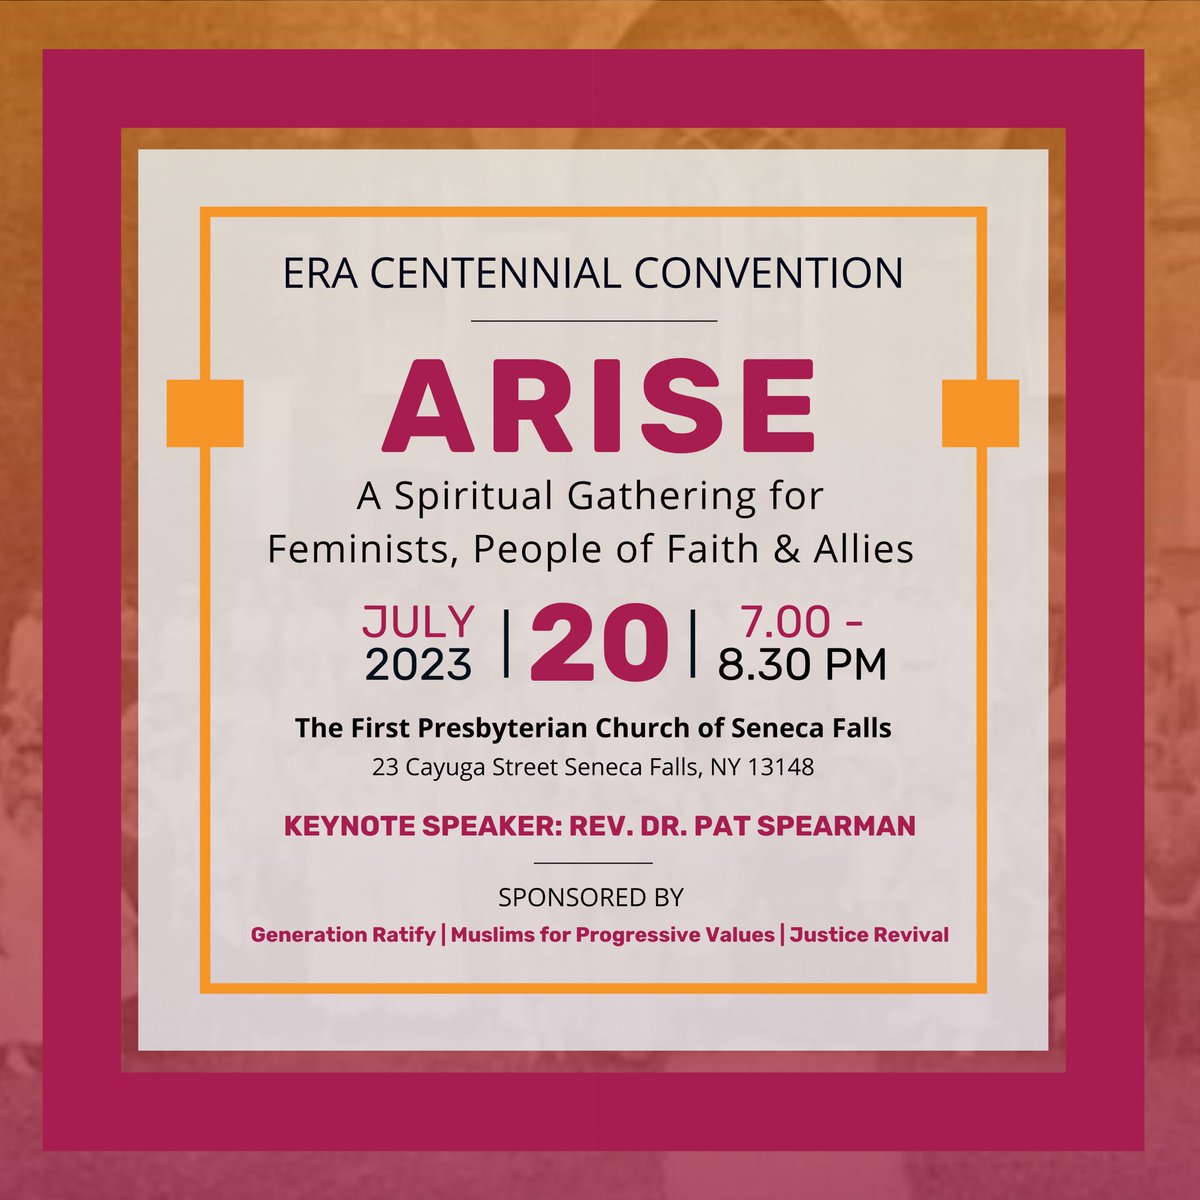 Join us in Seneca Falls (or online!) for ARISE: A Spiritual Gathering for Feminists, People of Faith, and Allies ✨

Hosted 7/20 at 7 pm ET, this evening of reflection and community will kick off the ERA Centennial Convention.

Learn more: bit.ly/JRERA100 #Faith4ERA